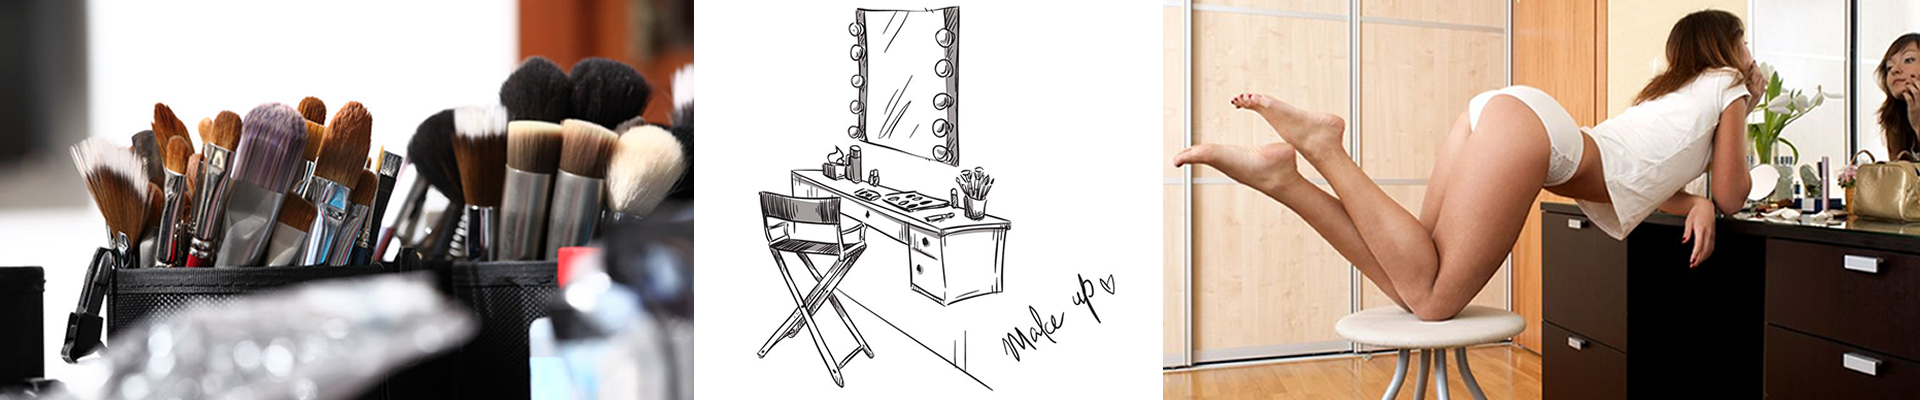 Dressing Tables | Oak, Wood & Mirrored Dressing Tables